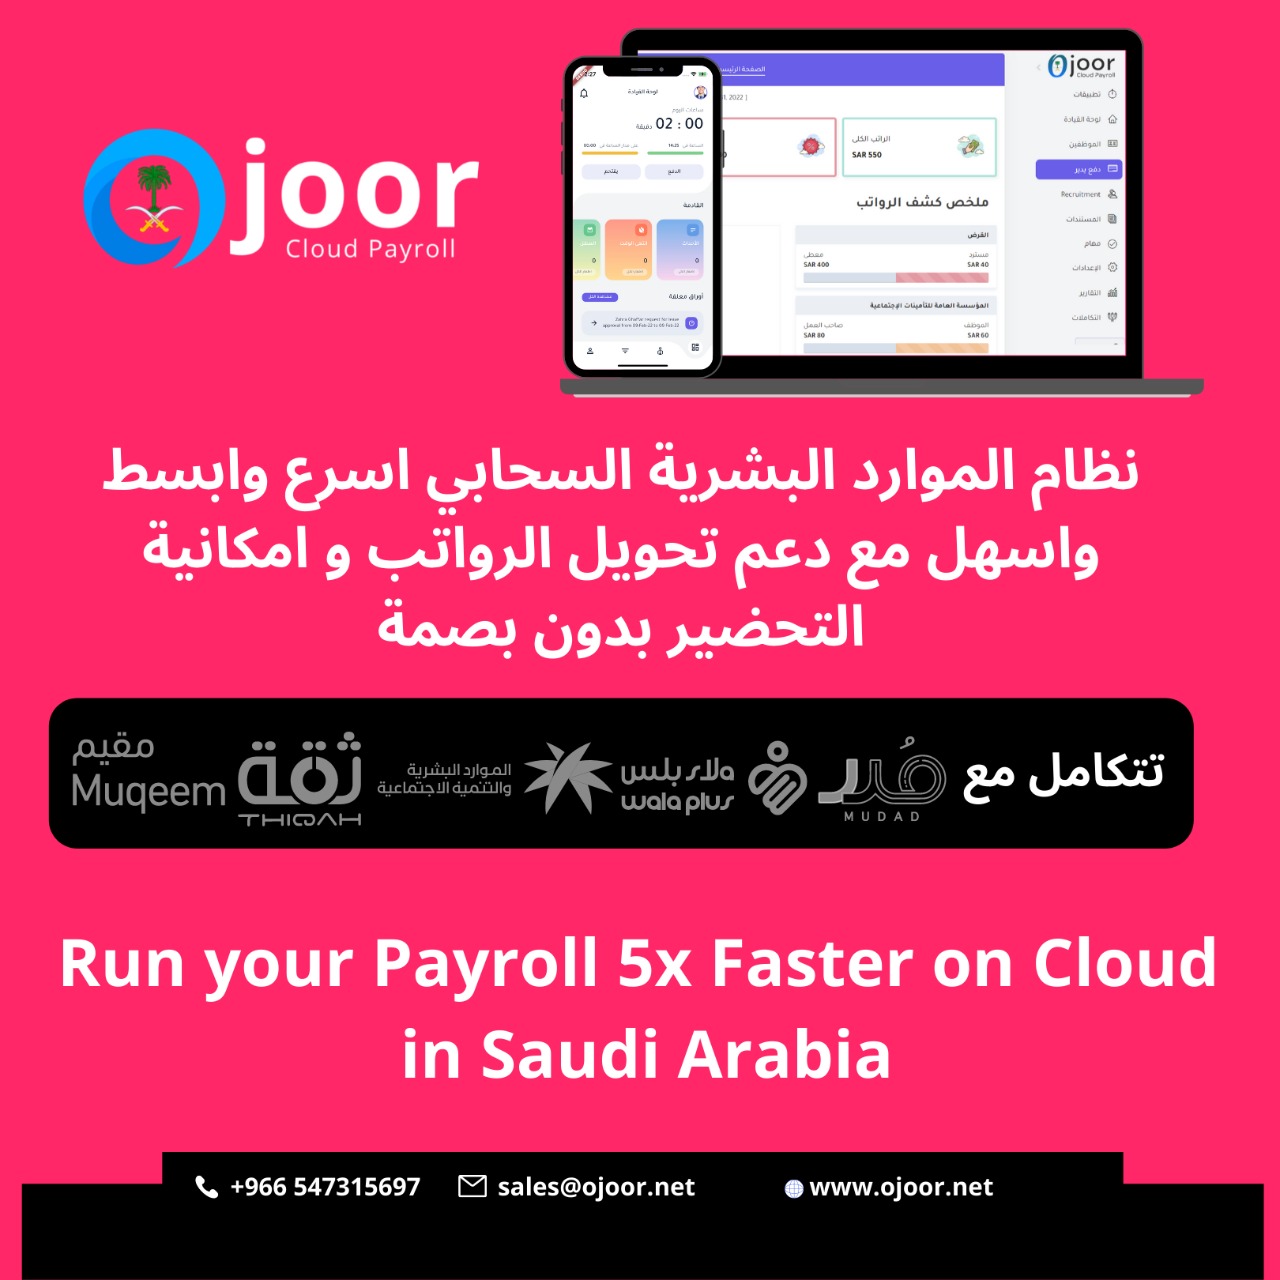 What is the automated Payroll System in Saudi Arabia?